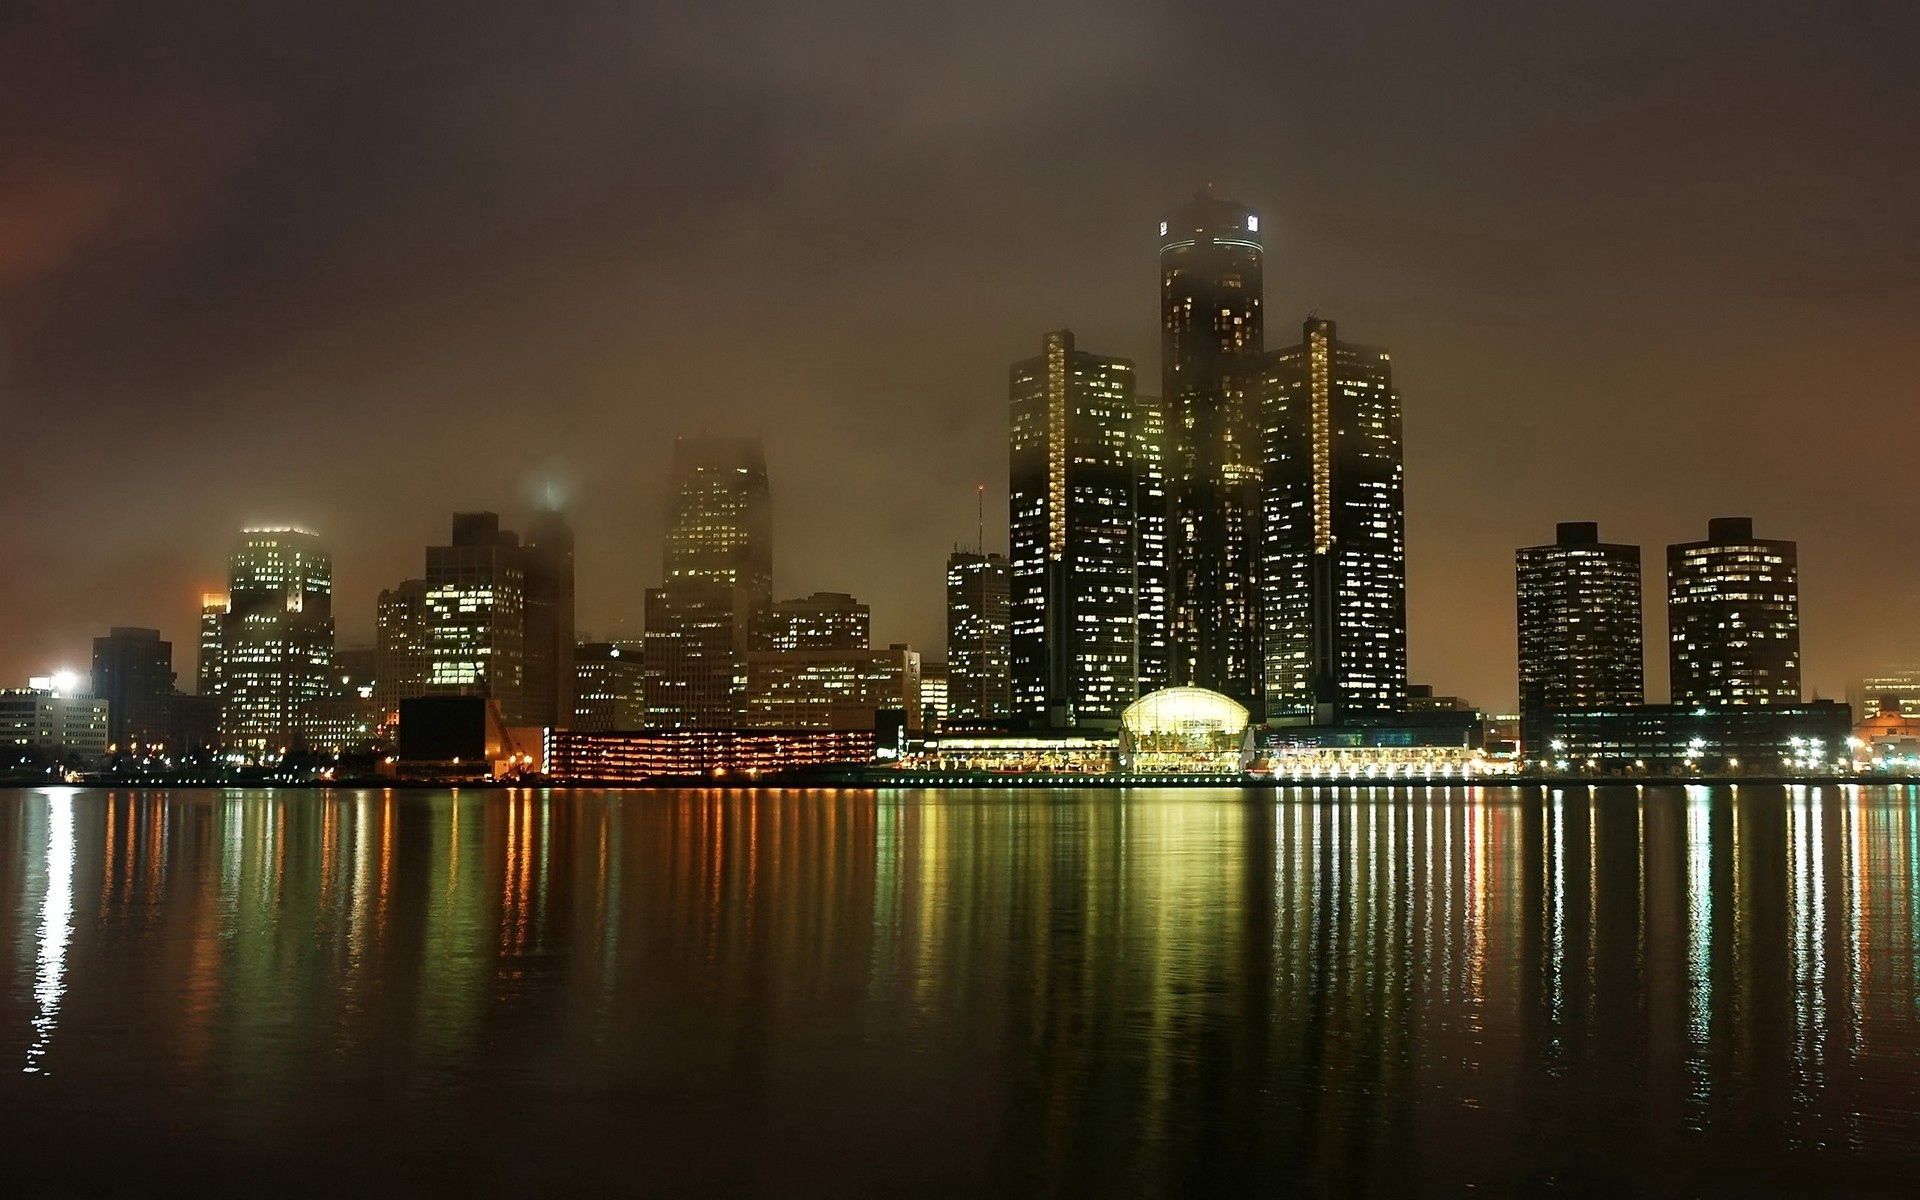 megapolis, landscape, cities, water, houses, sea, night, usa, building, lights, reflection, fog, ocean, skyscrapers, united states, megalopolis, view, bay, america, embankment, quay, michigan, detroit